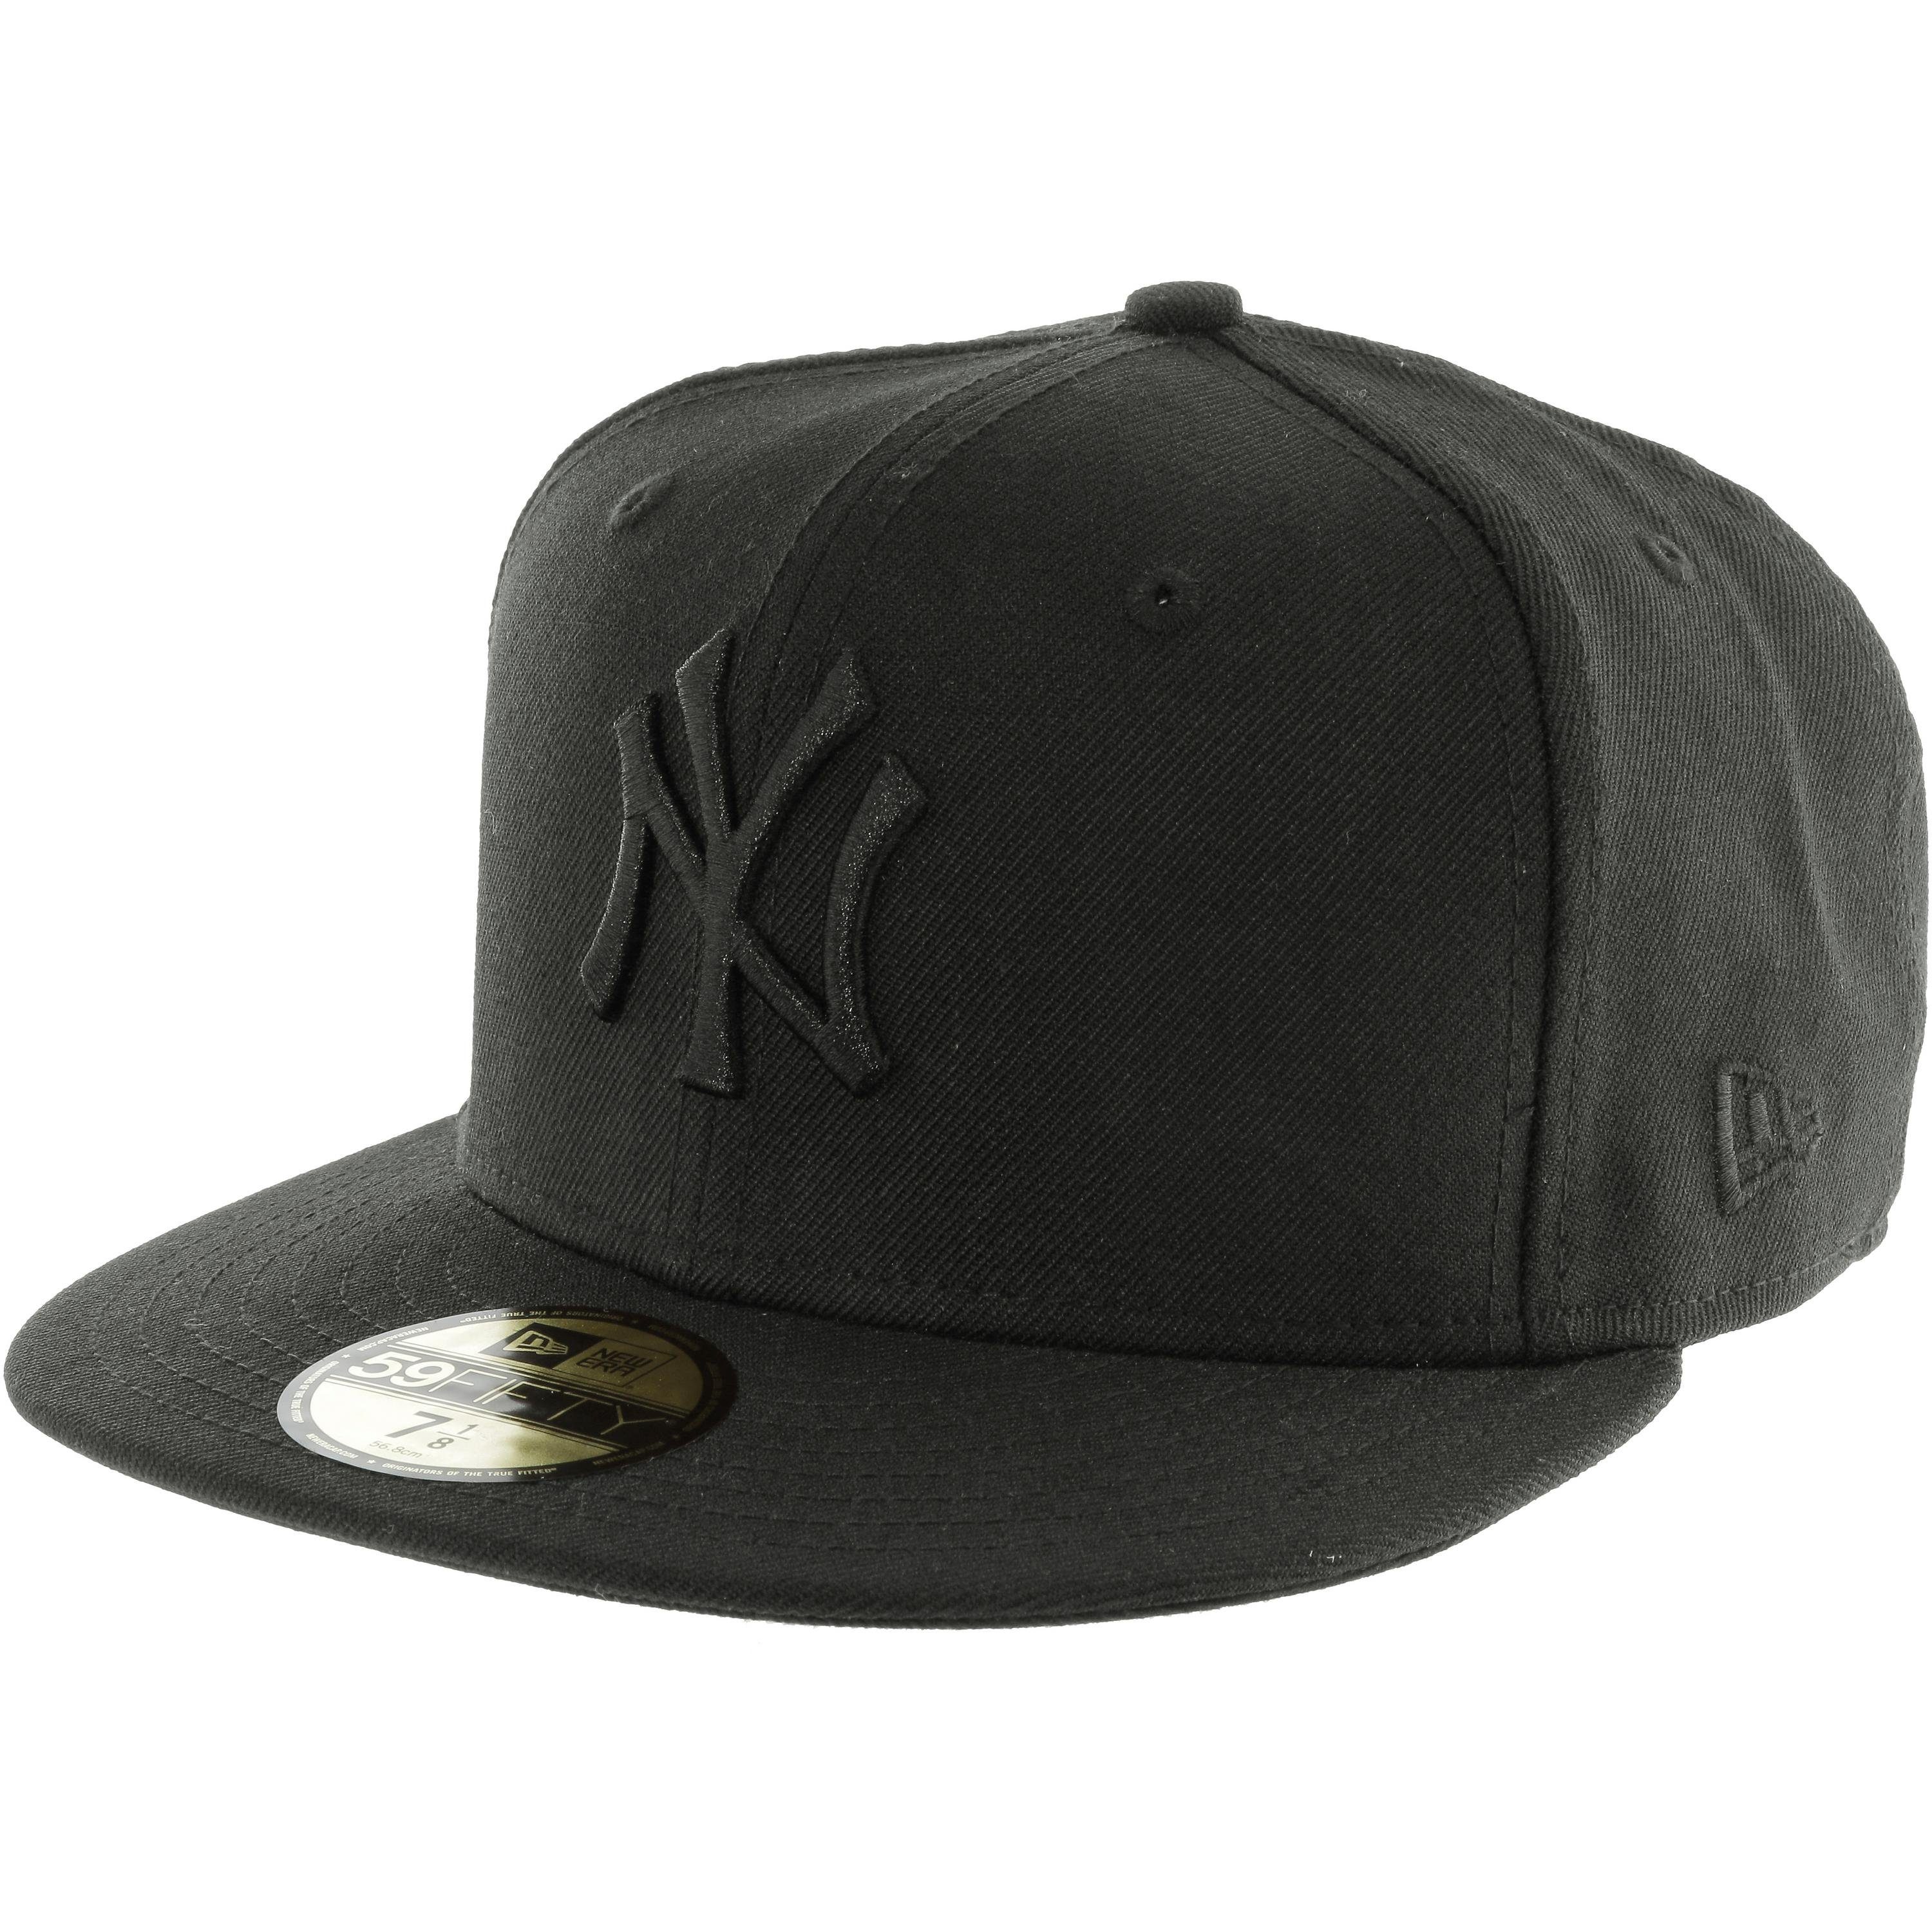 NY Fitted schwarz Era New Cap Yankees 59fifty